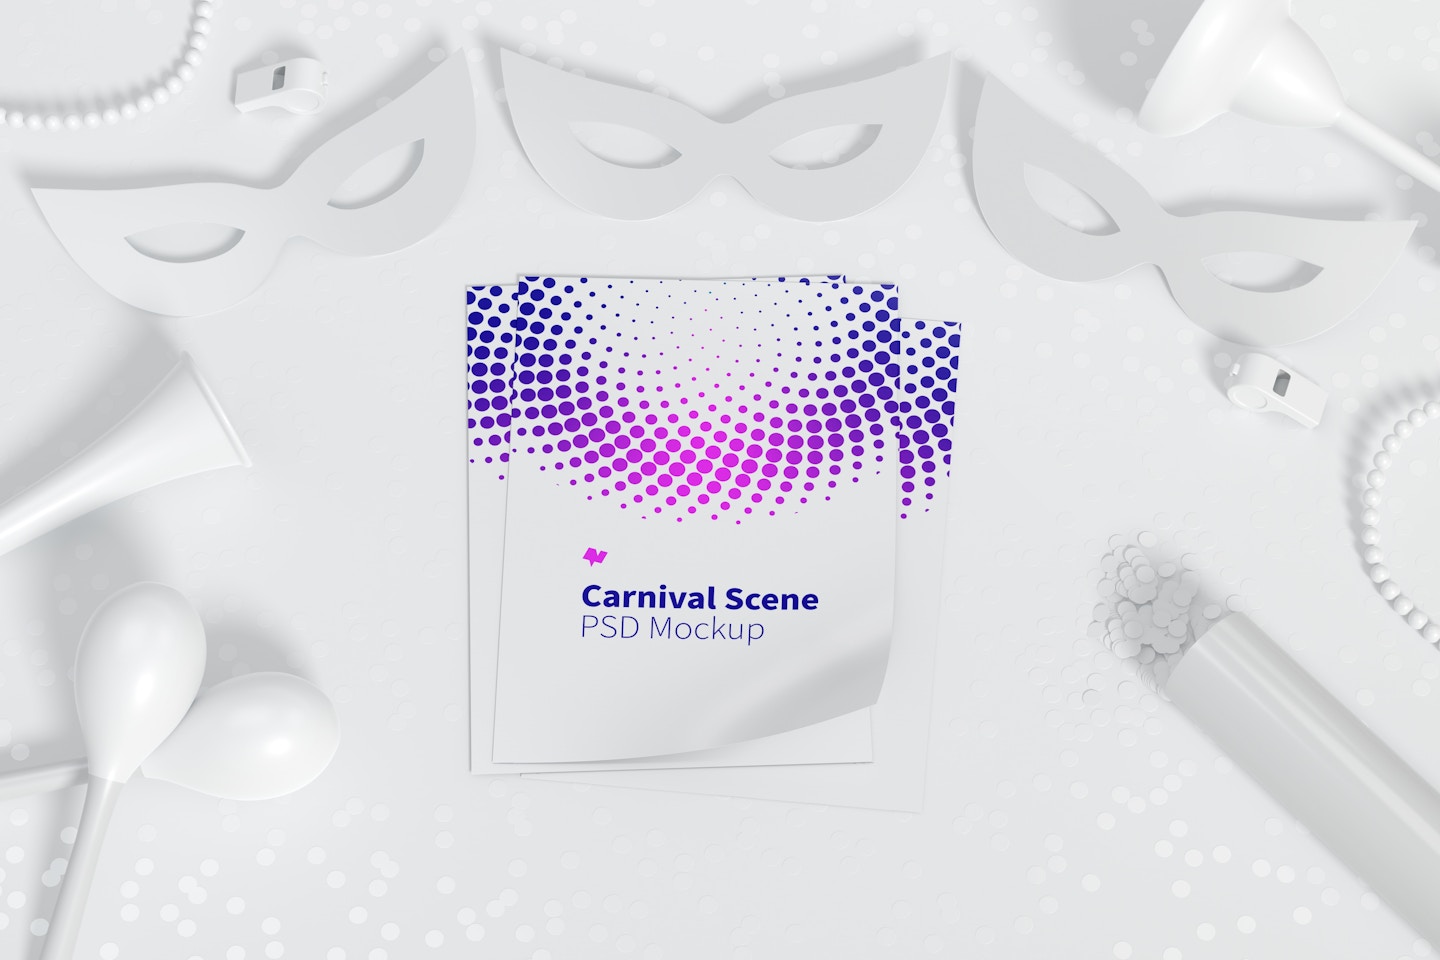 Carnival Scene with Flyer Mockup, Top View